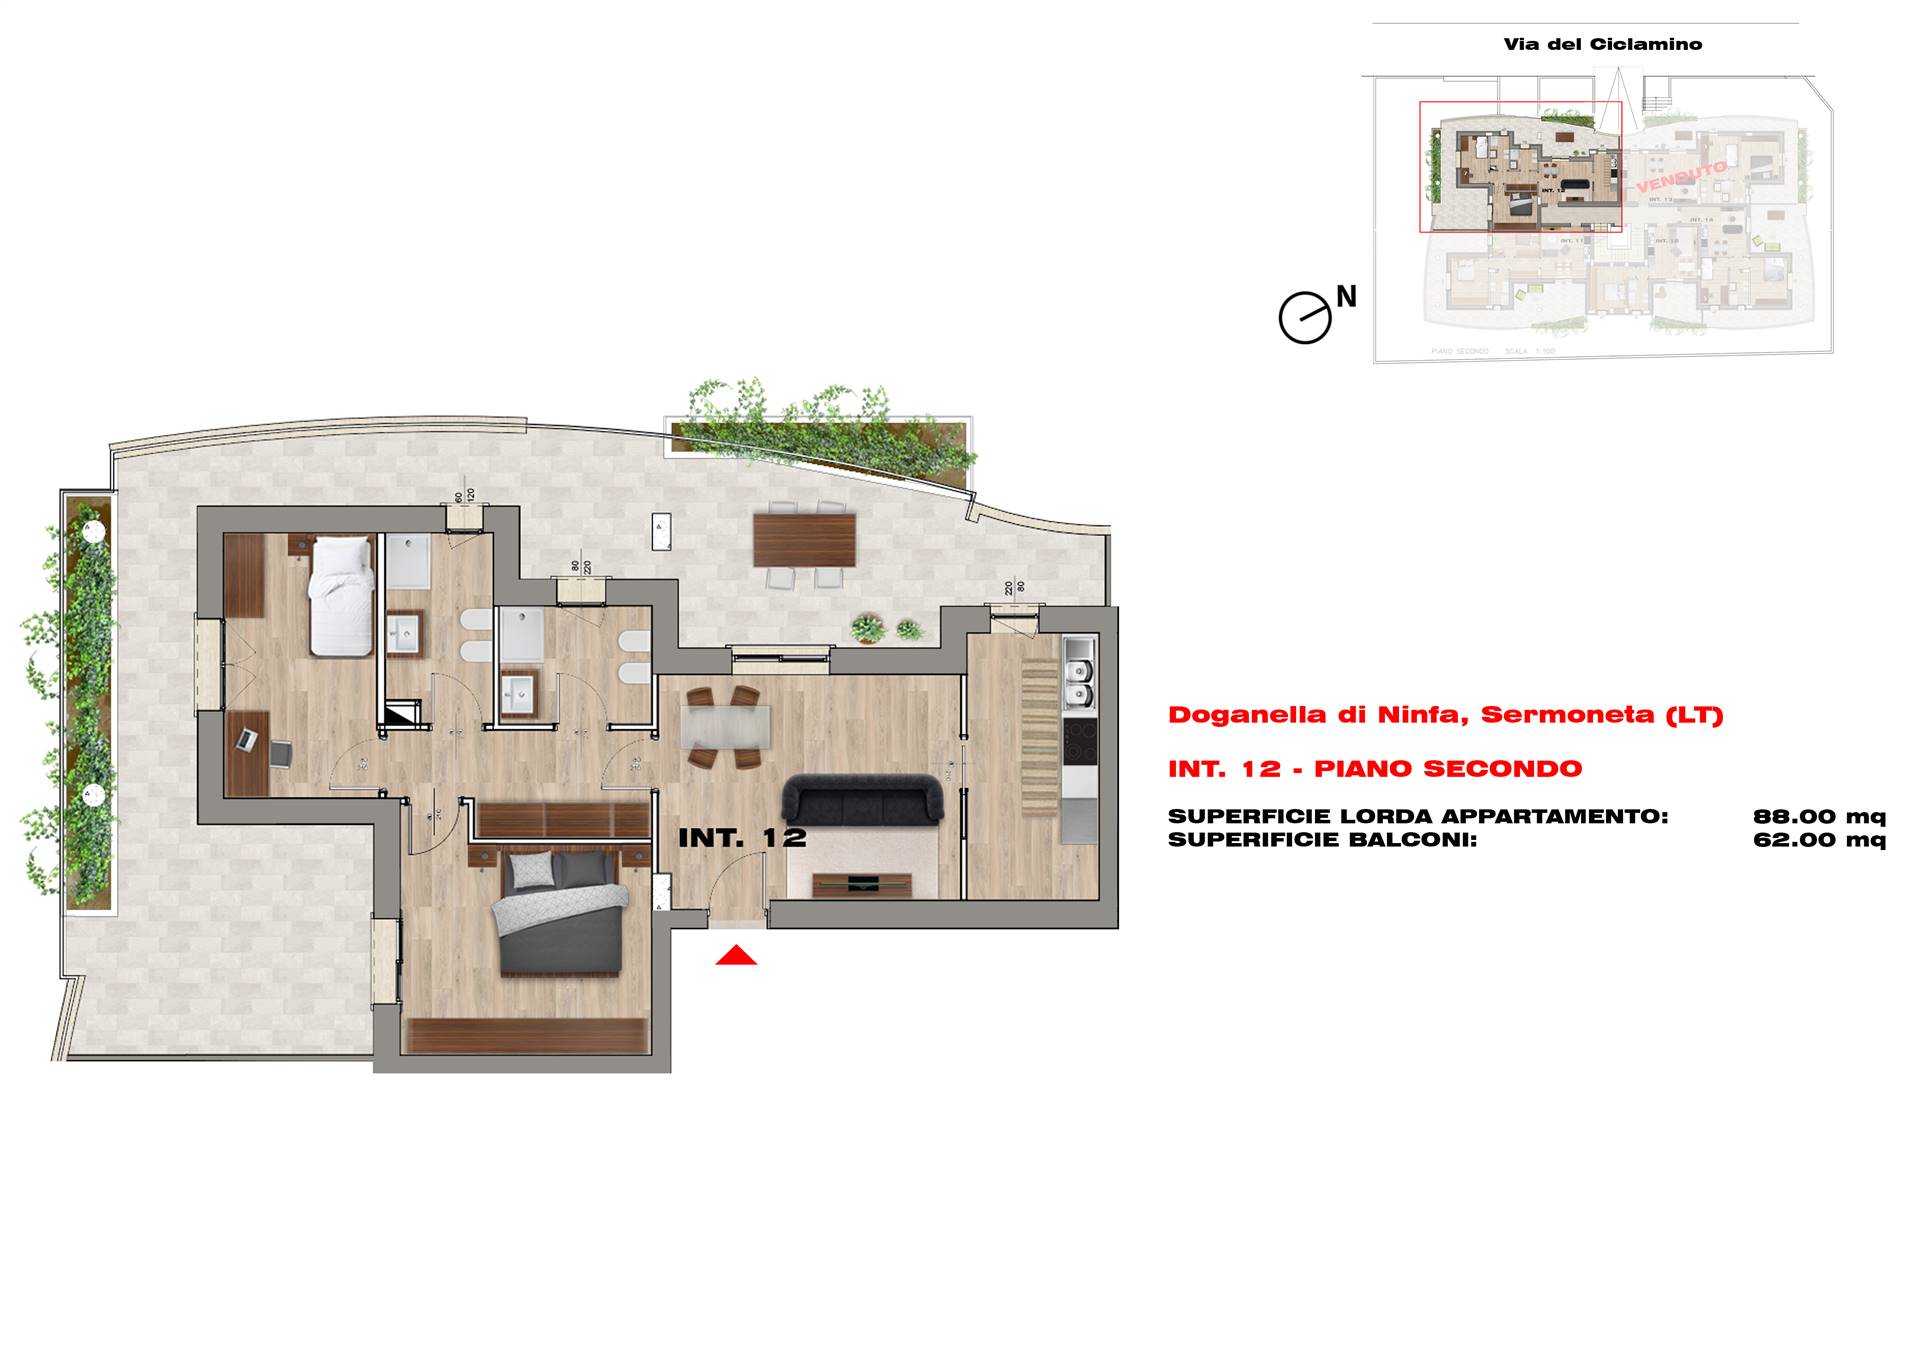 BIVIO DI DOGANELLA, SERMONETA, Apartment for sale of 88 Sq. mt., New construction, Heating Centralized, placed at 2° on 3, composed by: 4 Rooms, 